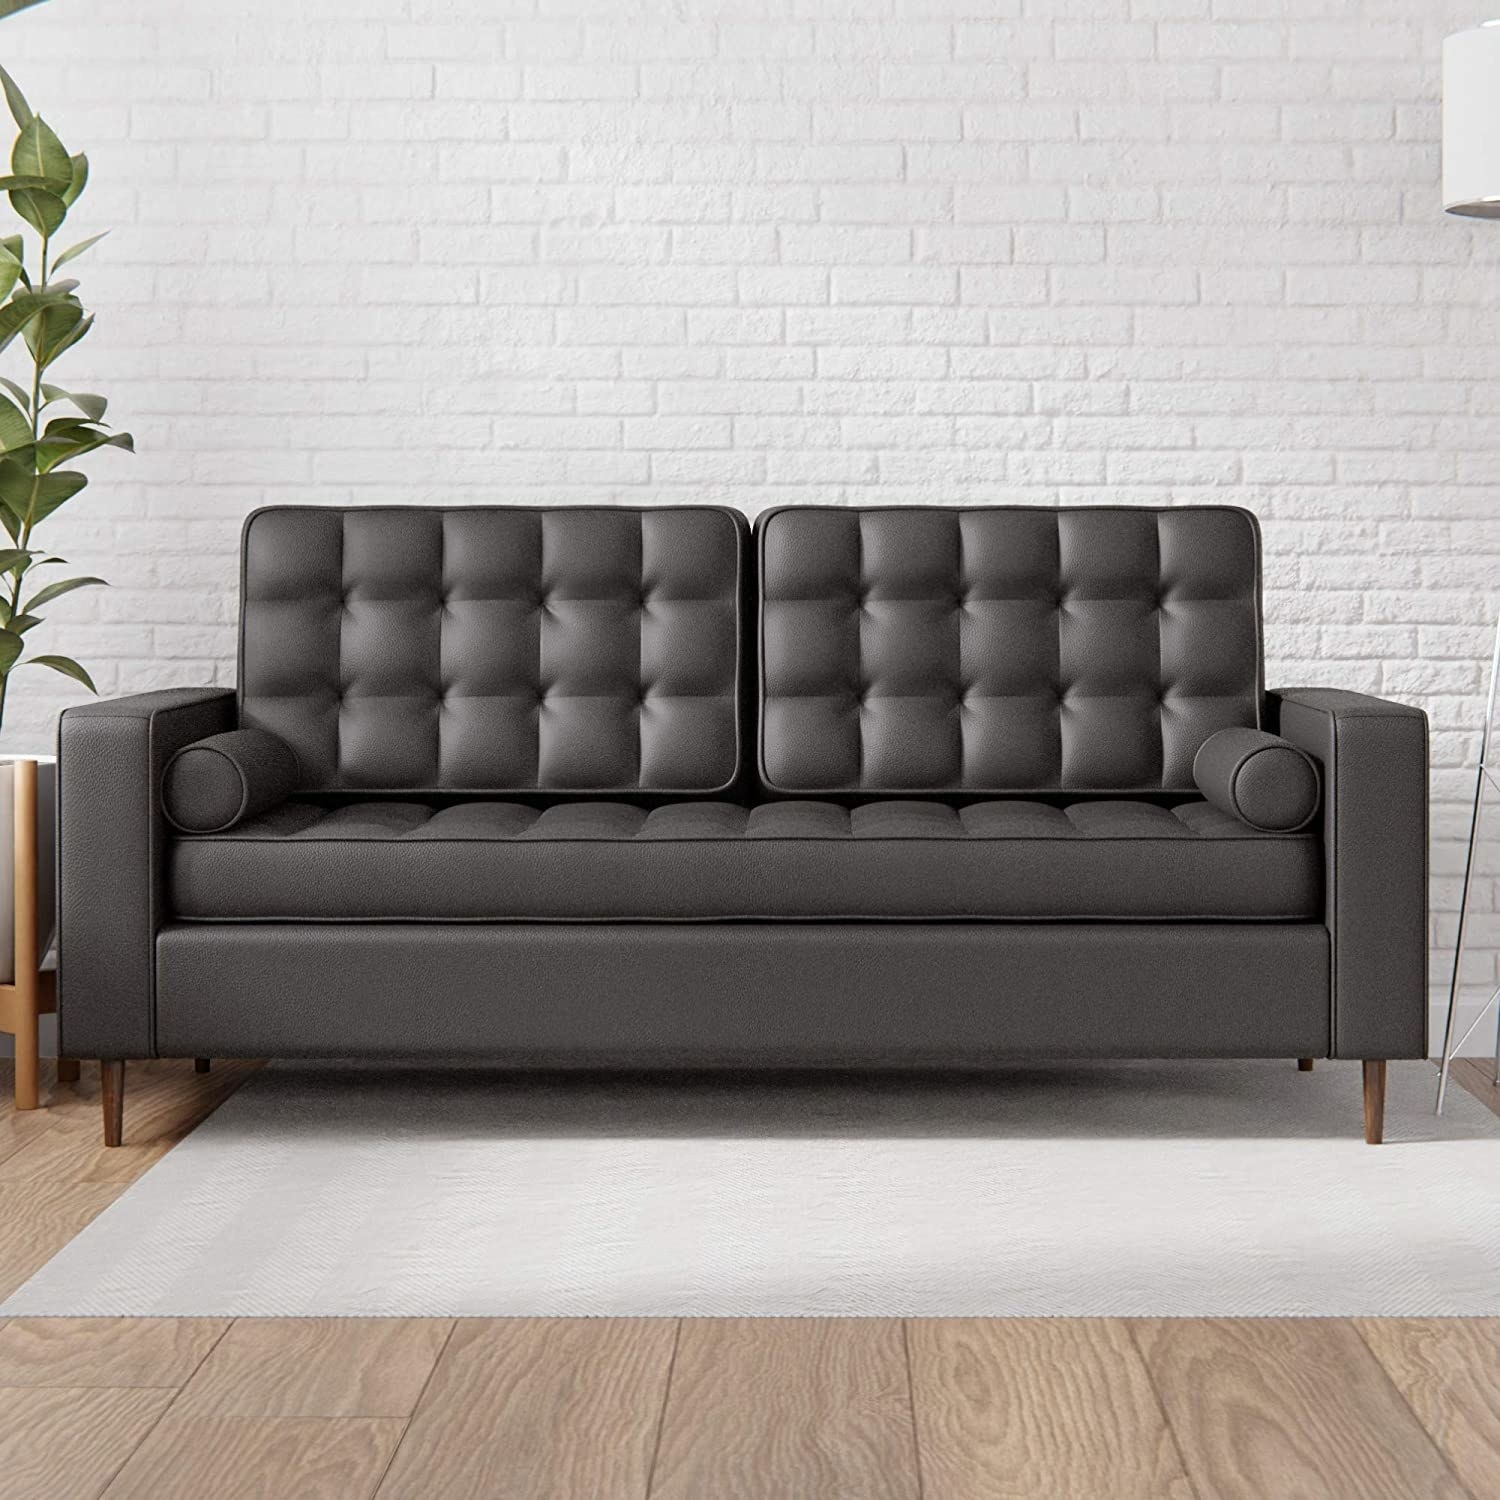 A grey square couch